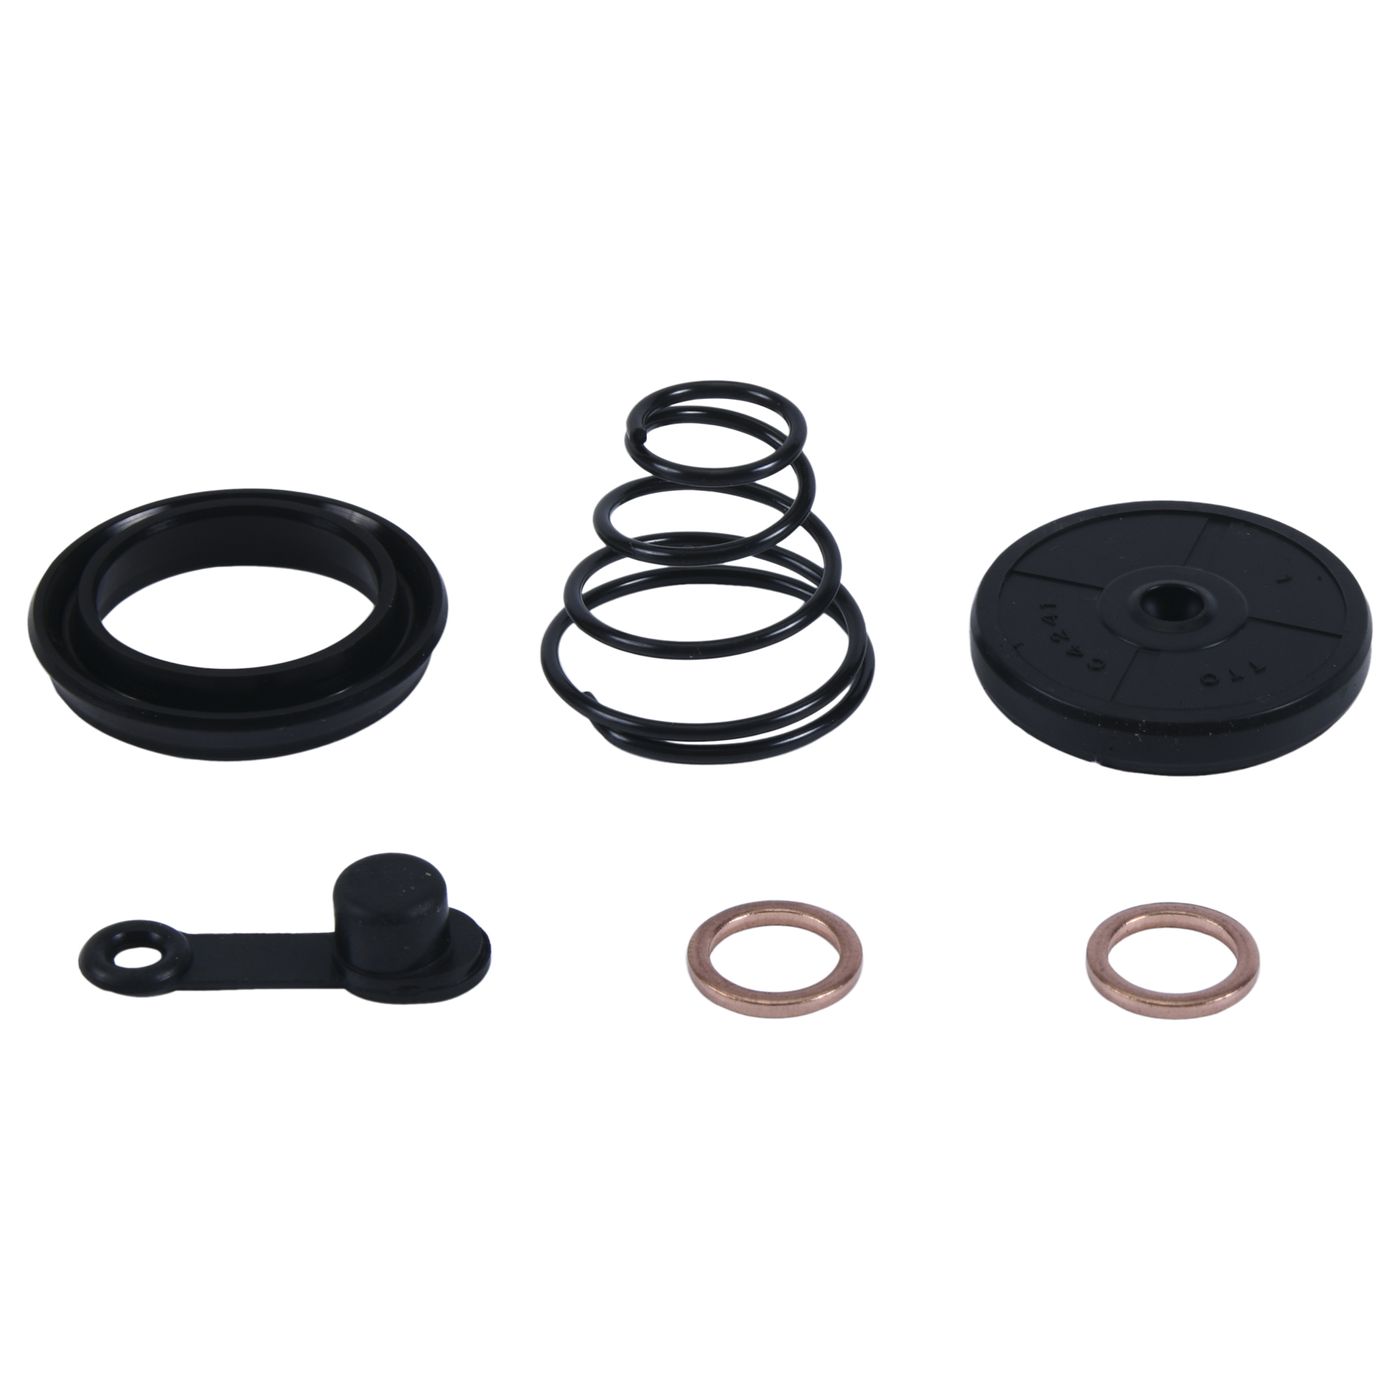 Wrp Clutch Slave Cylinder Kits - WRP186027 image